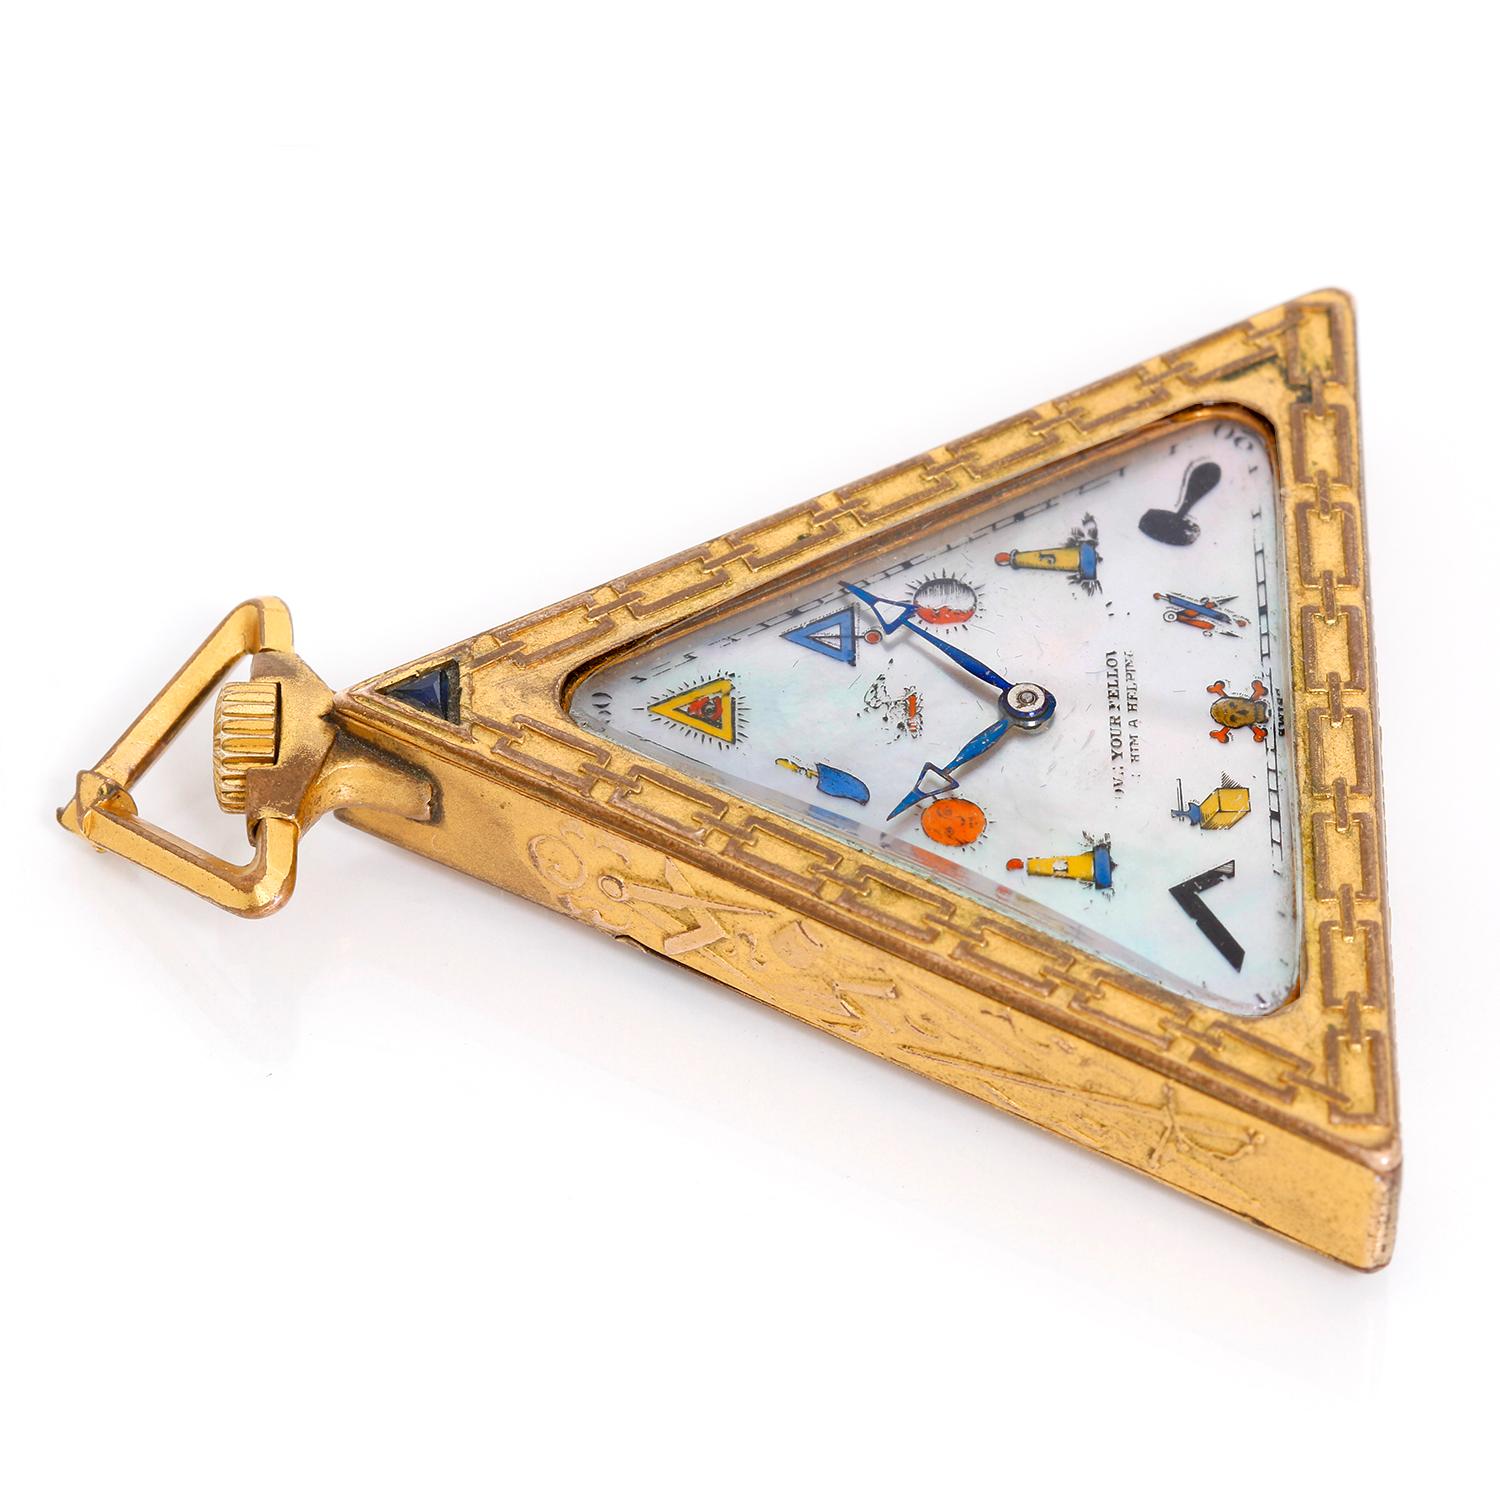 Masonic Mother of Pearl Gilt Pocket Watch Circa 1920's - Manual winding; Movement made by Timpor Watch Co. 15 jewels. Gilt case  with Masonic symbols; Triangular blue stone below the pendant ( 51 x 51 x 51 mm ) . Mother of Pearl dial with printed